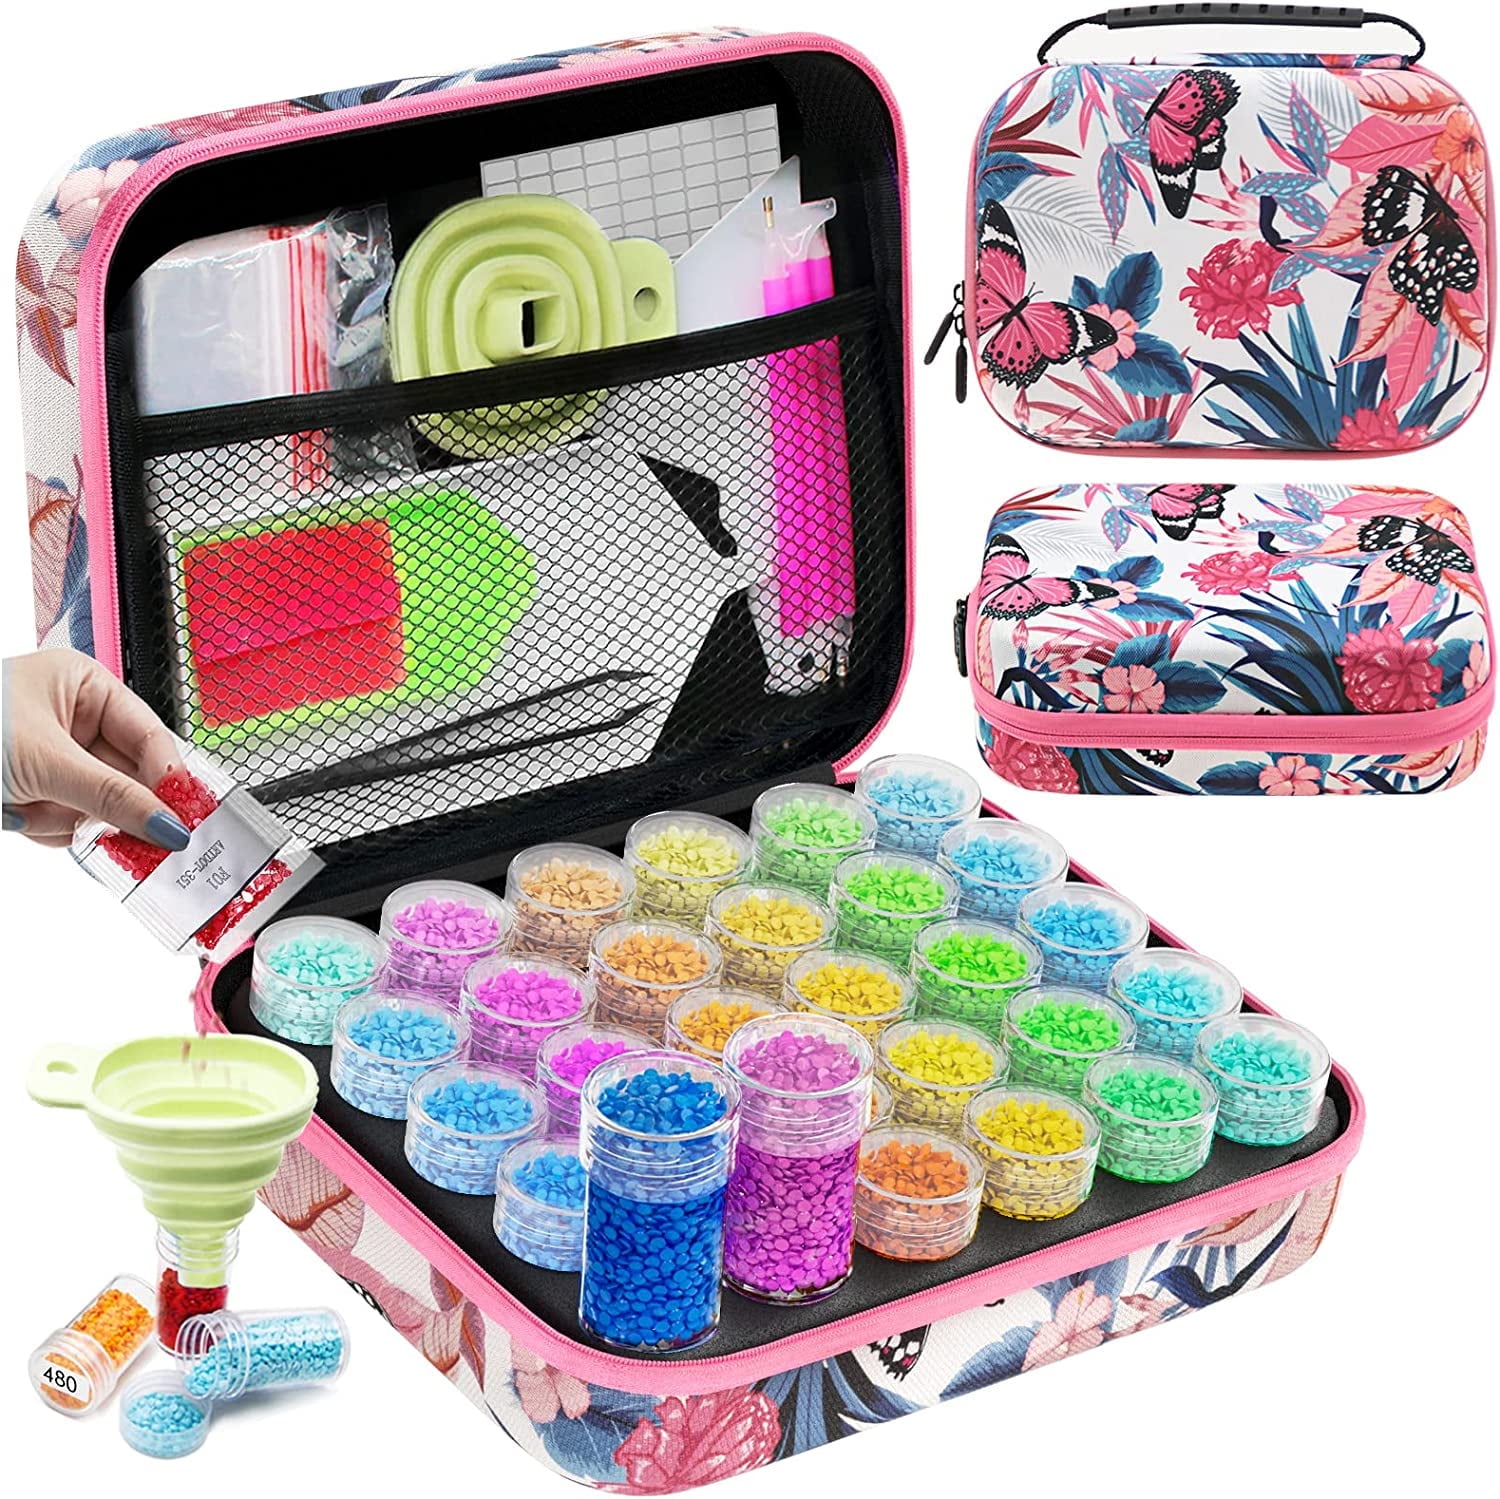 88pcs 5D DIY Diamond Painting Accessories Tools Kits with Diamond Embroidery Storage Box and Roller,Diamond Painting Art for Adults and Kids,with